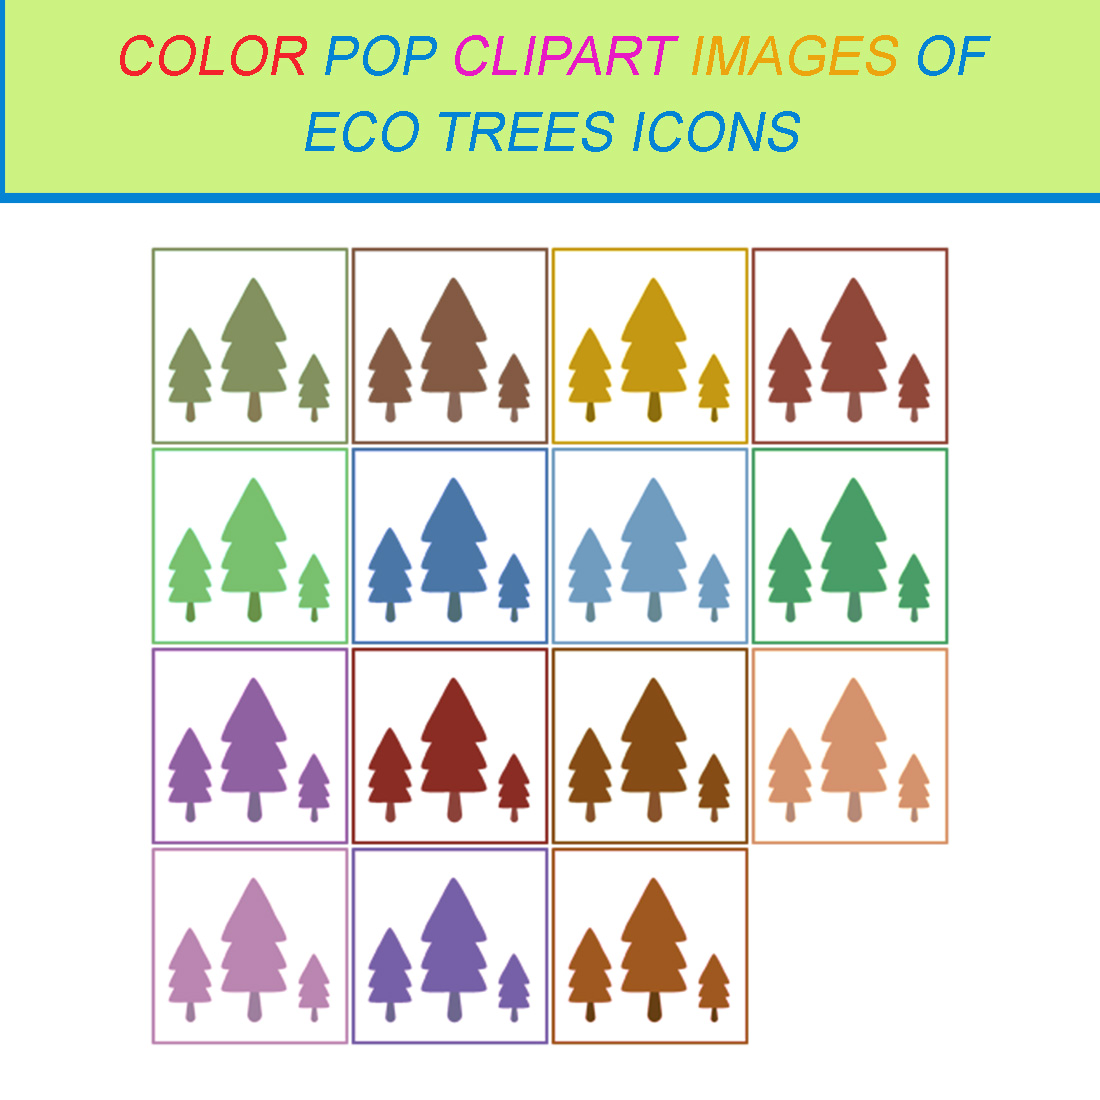 15 COLOR POP CLIPART IMAGES OF ECO TREES ICONS cover image.